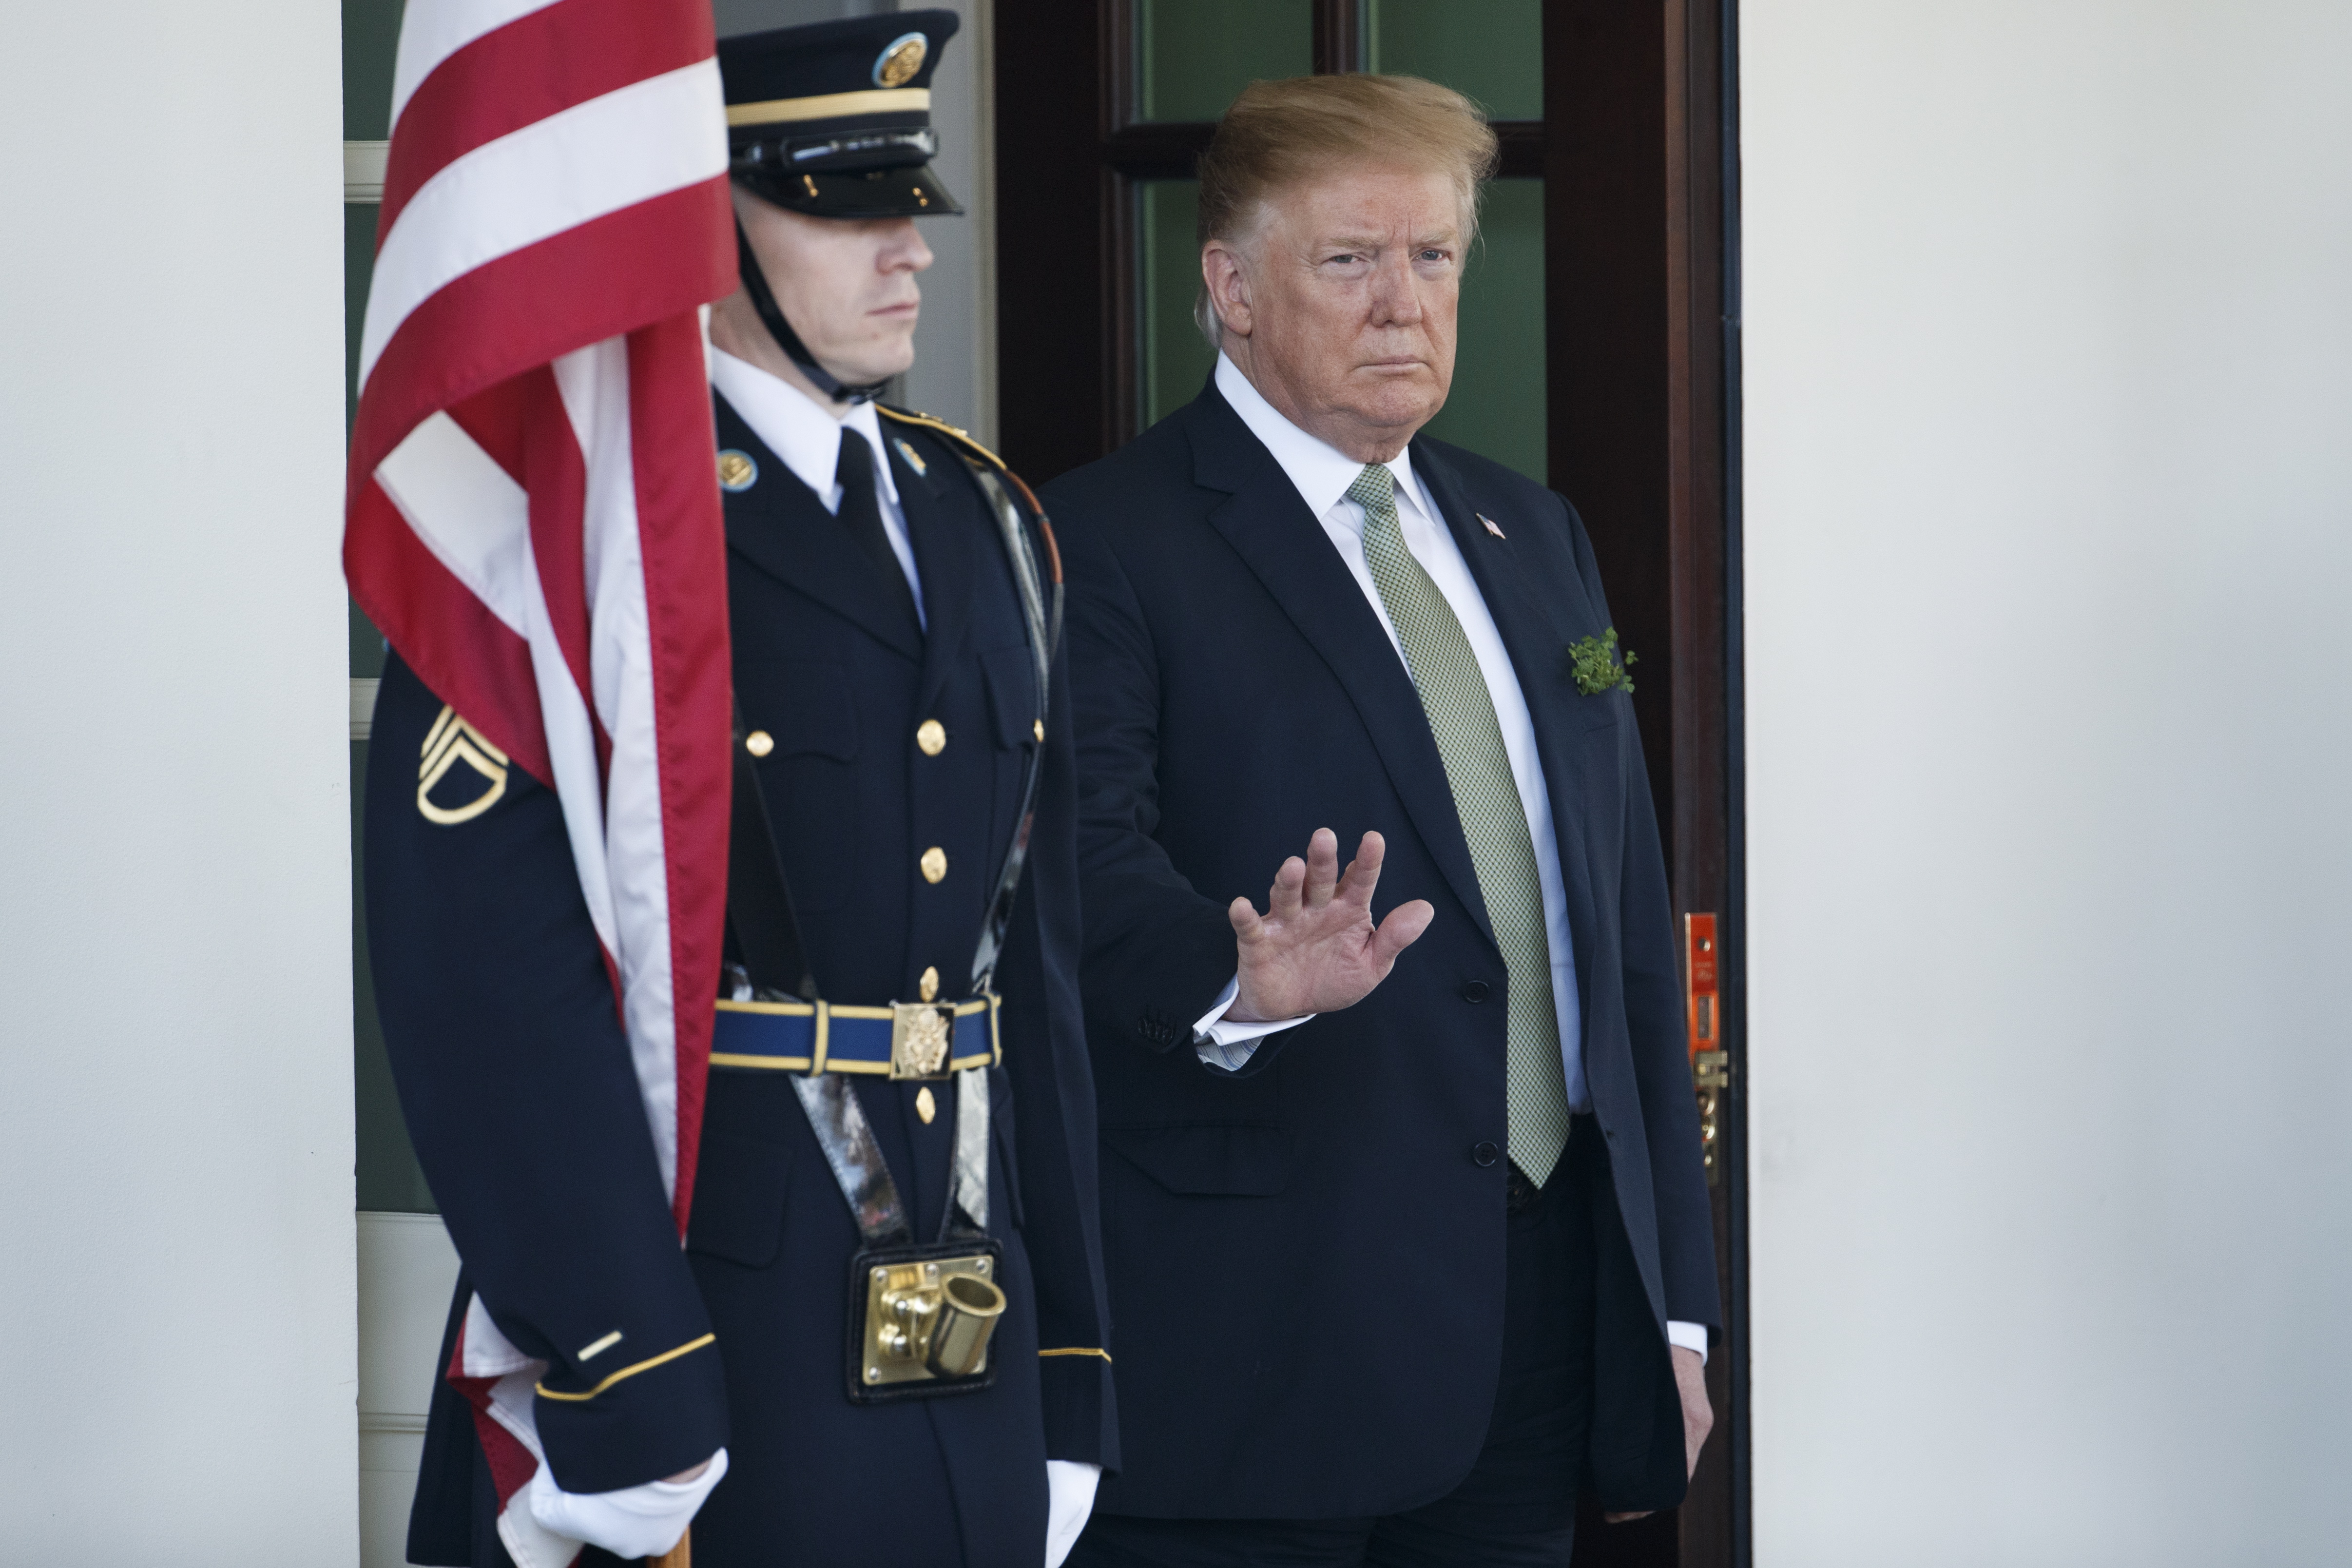 epa07436633 US President Donald J. Trump (L) waits for Irish Taoiseach Leo Varadkar as he arrives at the West Wing of the White House in Washington, DC, USA, 14 March 2019. The President and Taoiseach will meet in the Oval Office, visit the US Capitol and finally participate in the Shamrock Bowl Presentation at a White House reception.  EPA/SHAWN THEW